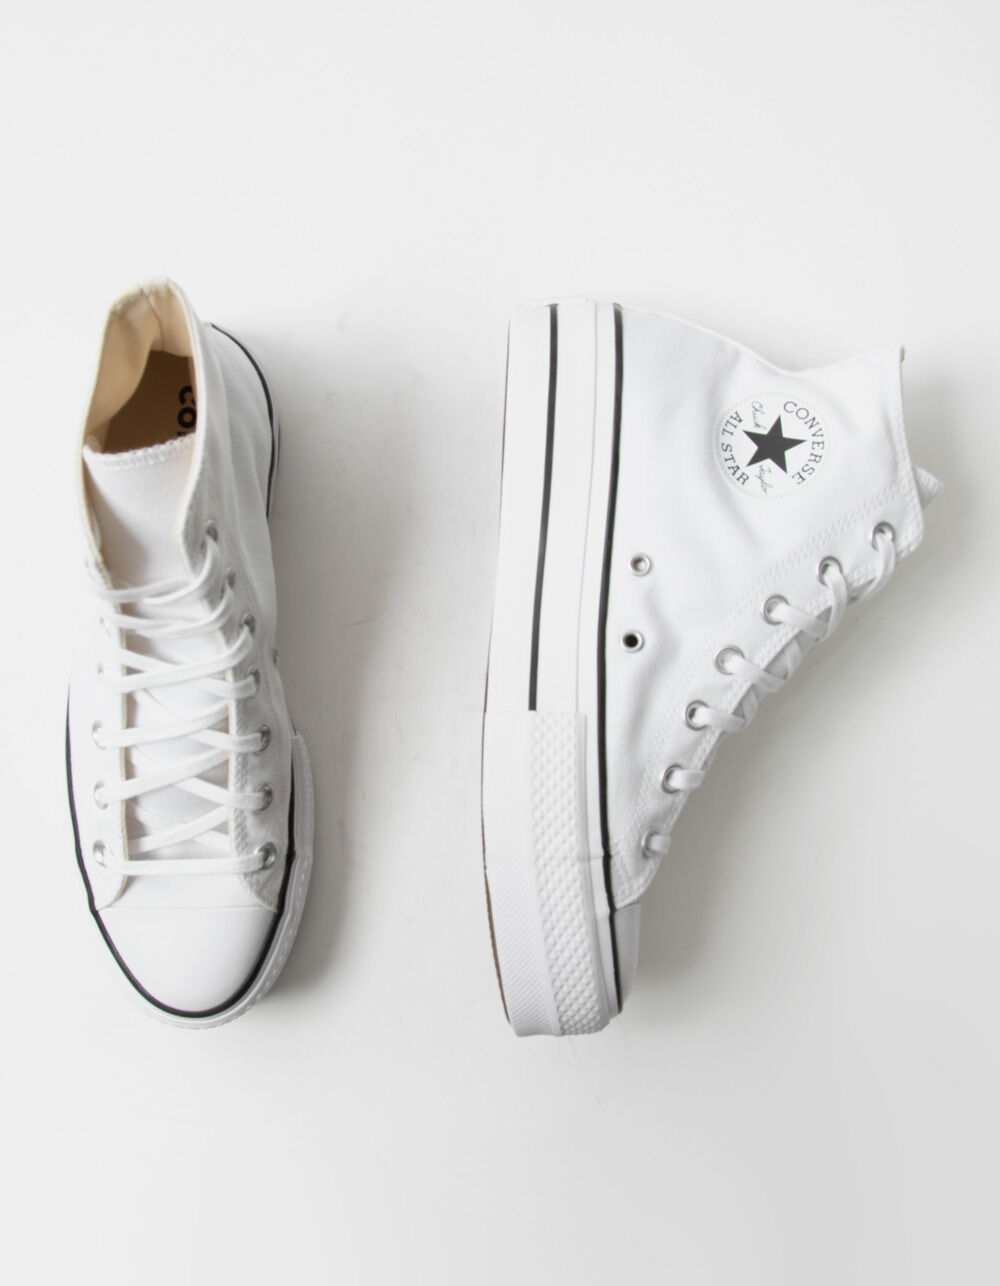 CONVERSE Chuck Taylor All Star High Top Shoes - OFF WHITE